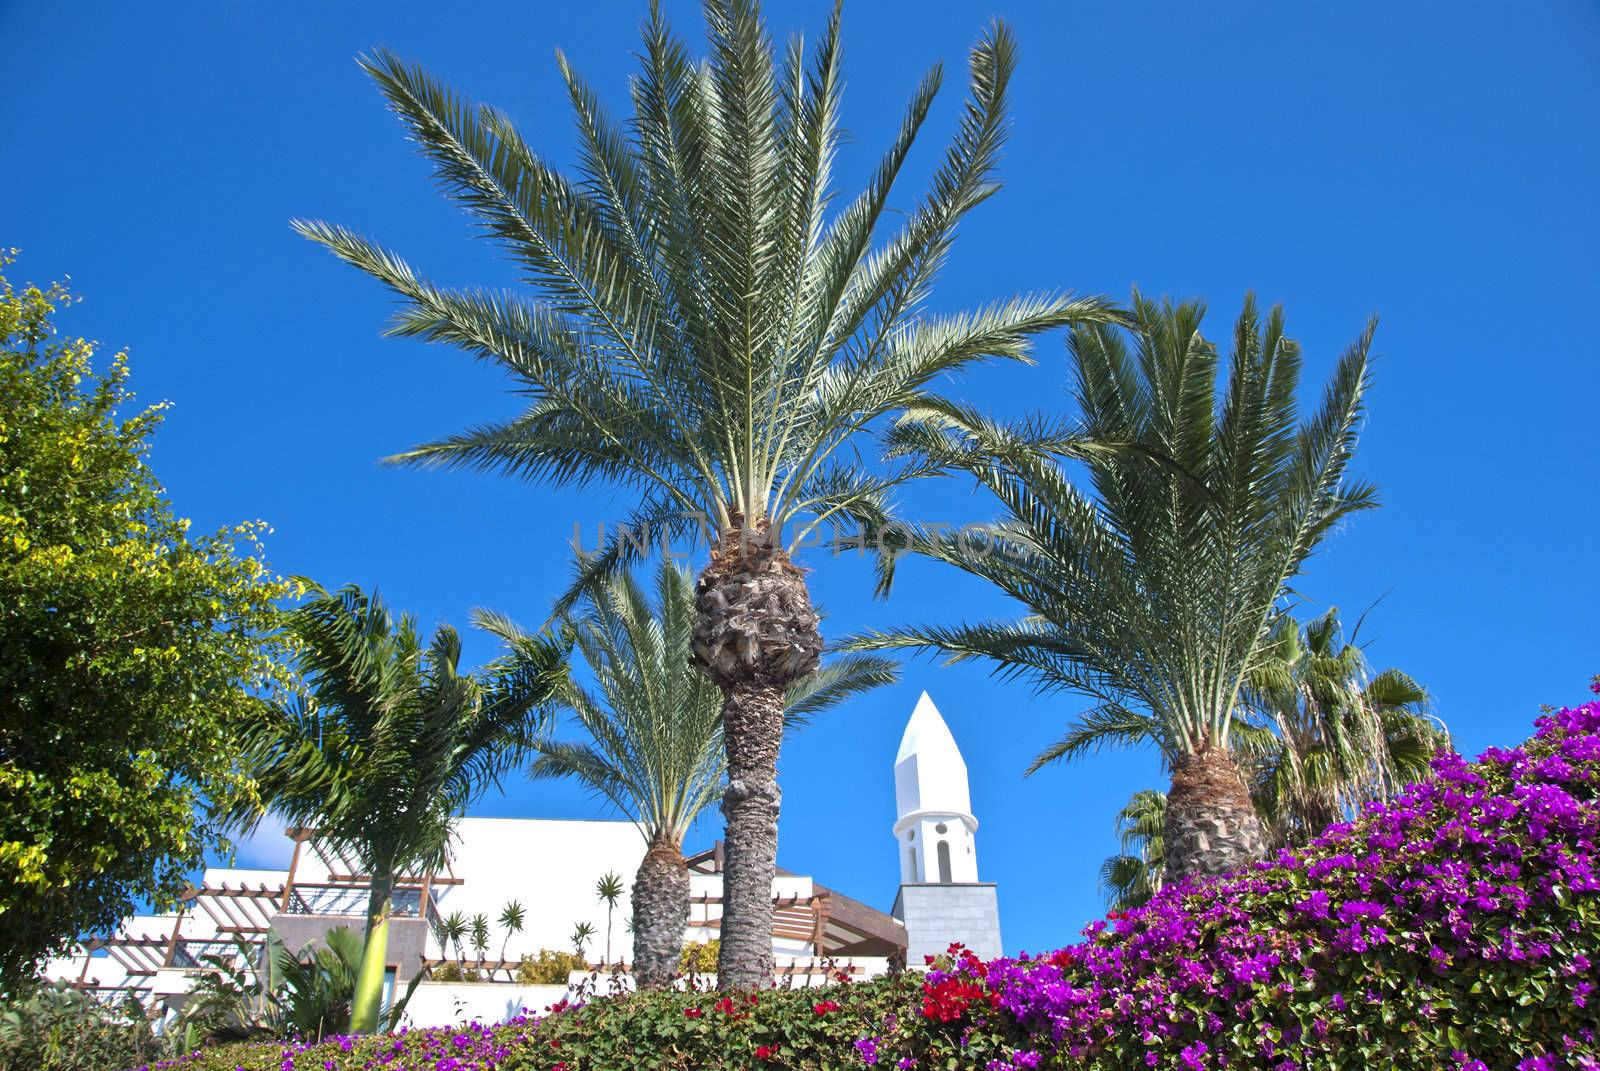 A Traditional Canary Island Bell Tower Palm Trees and Bougainvillea